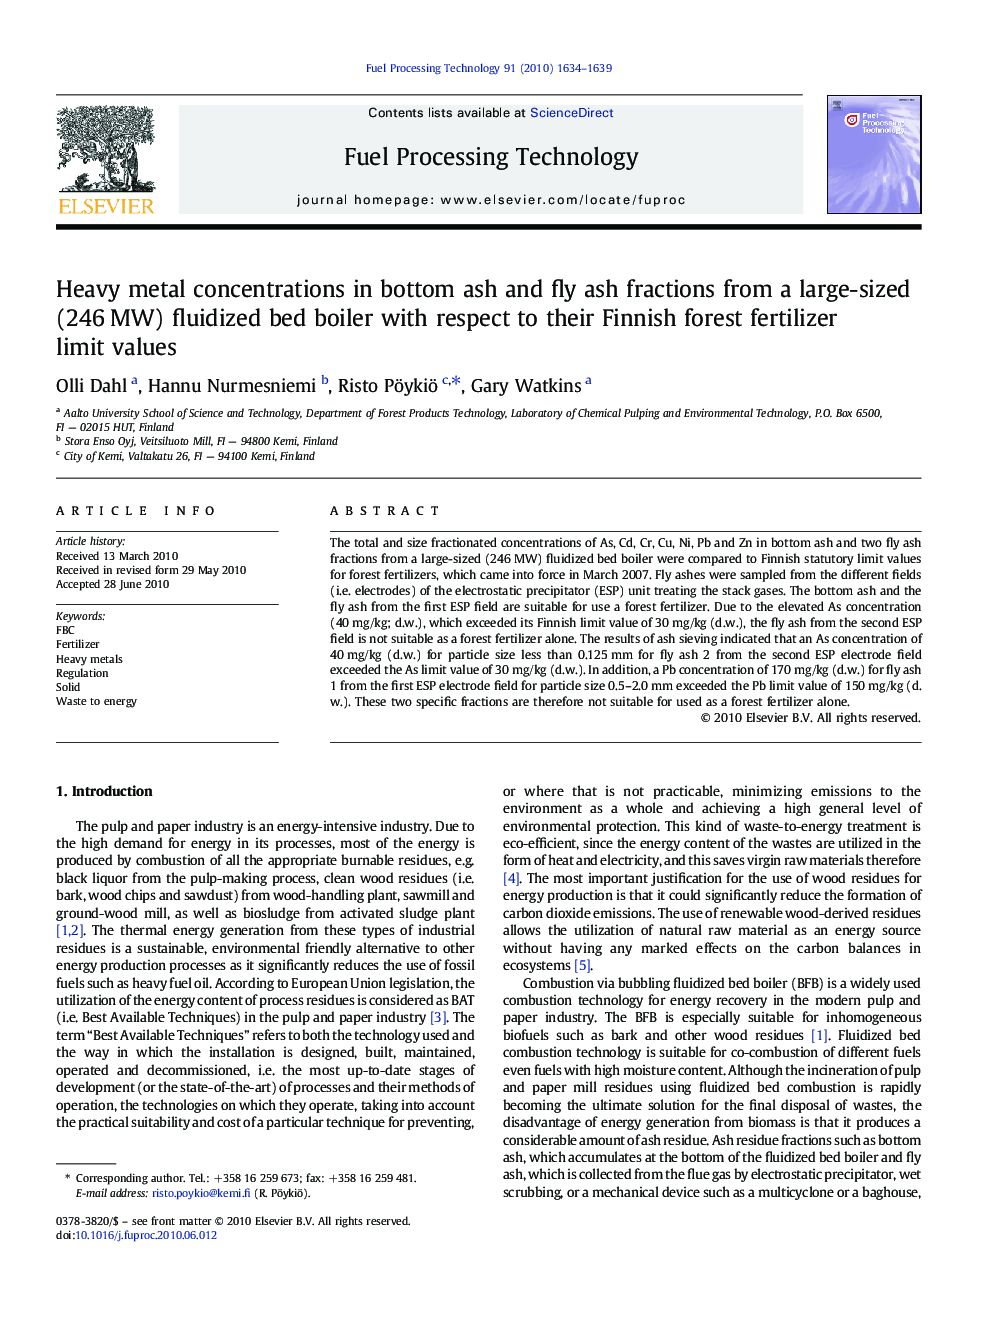 Heavy metal concentrations in bottom ash and fly ash fractions from a large-sized (246 MW) fluidized bed boiler with respect to their Finnish forest fertilizer limit values